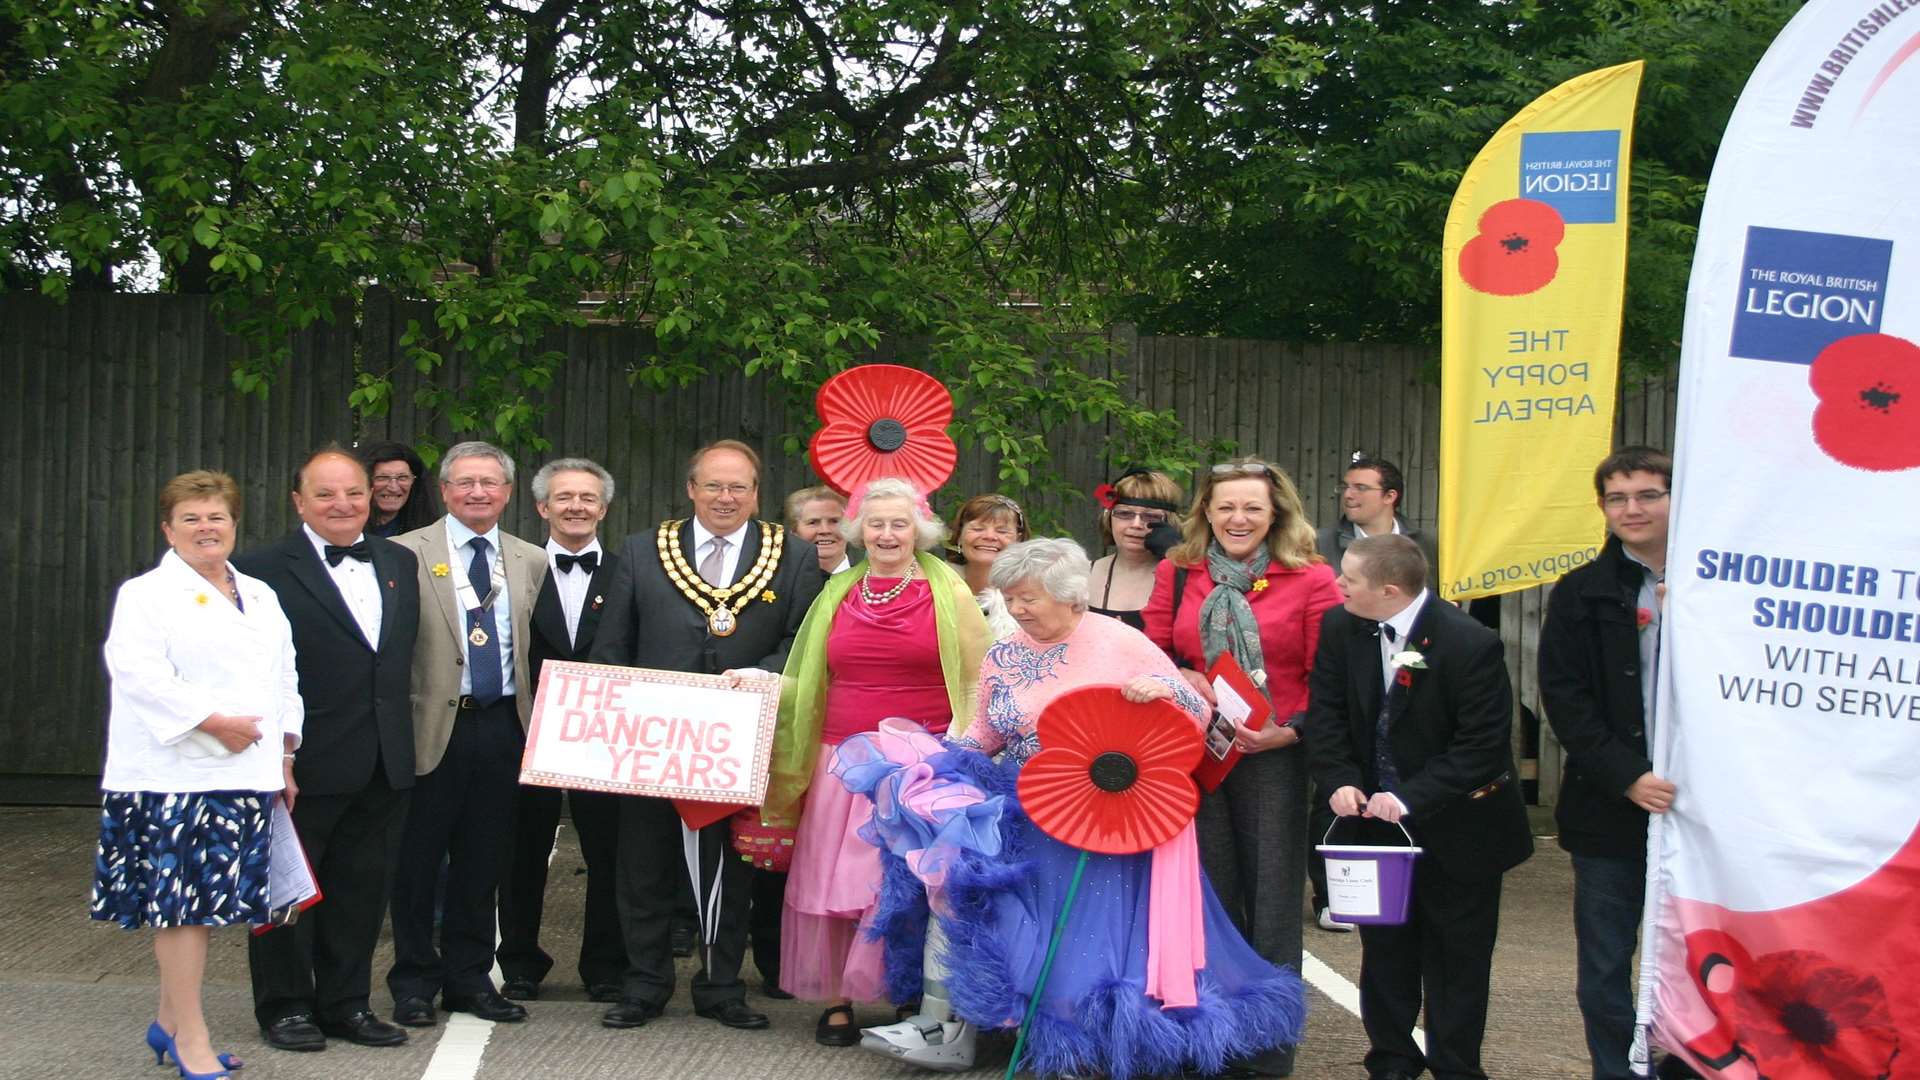 Veronica Jackson continued her role as the poppy appeal organiser event after knee surgery